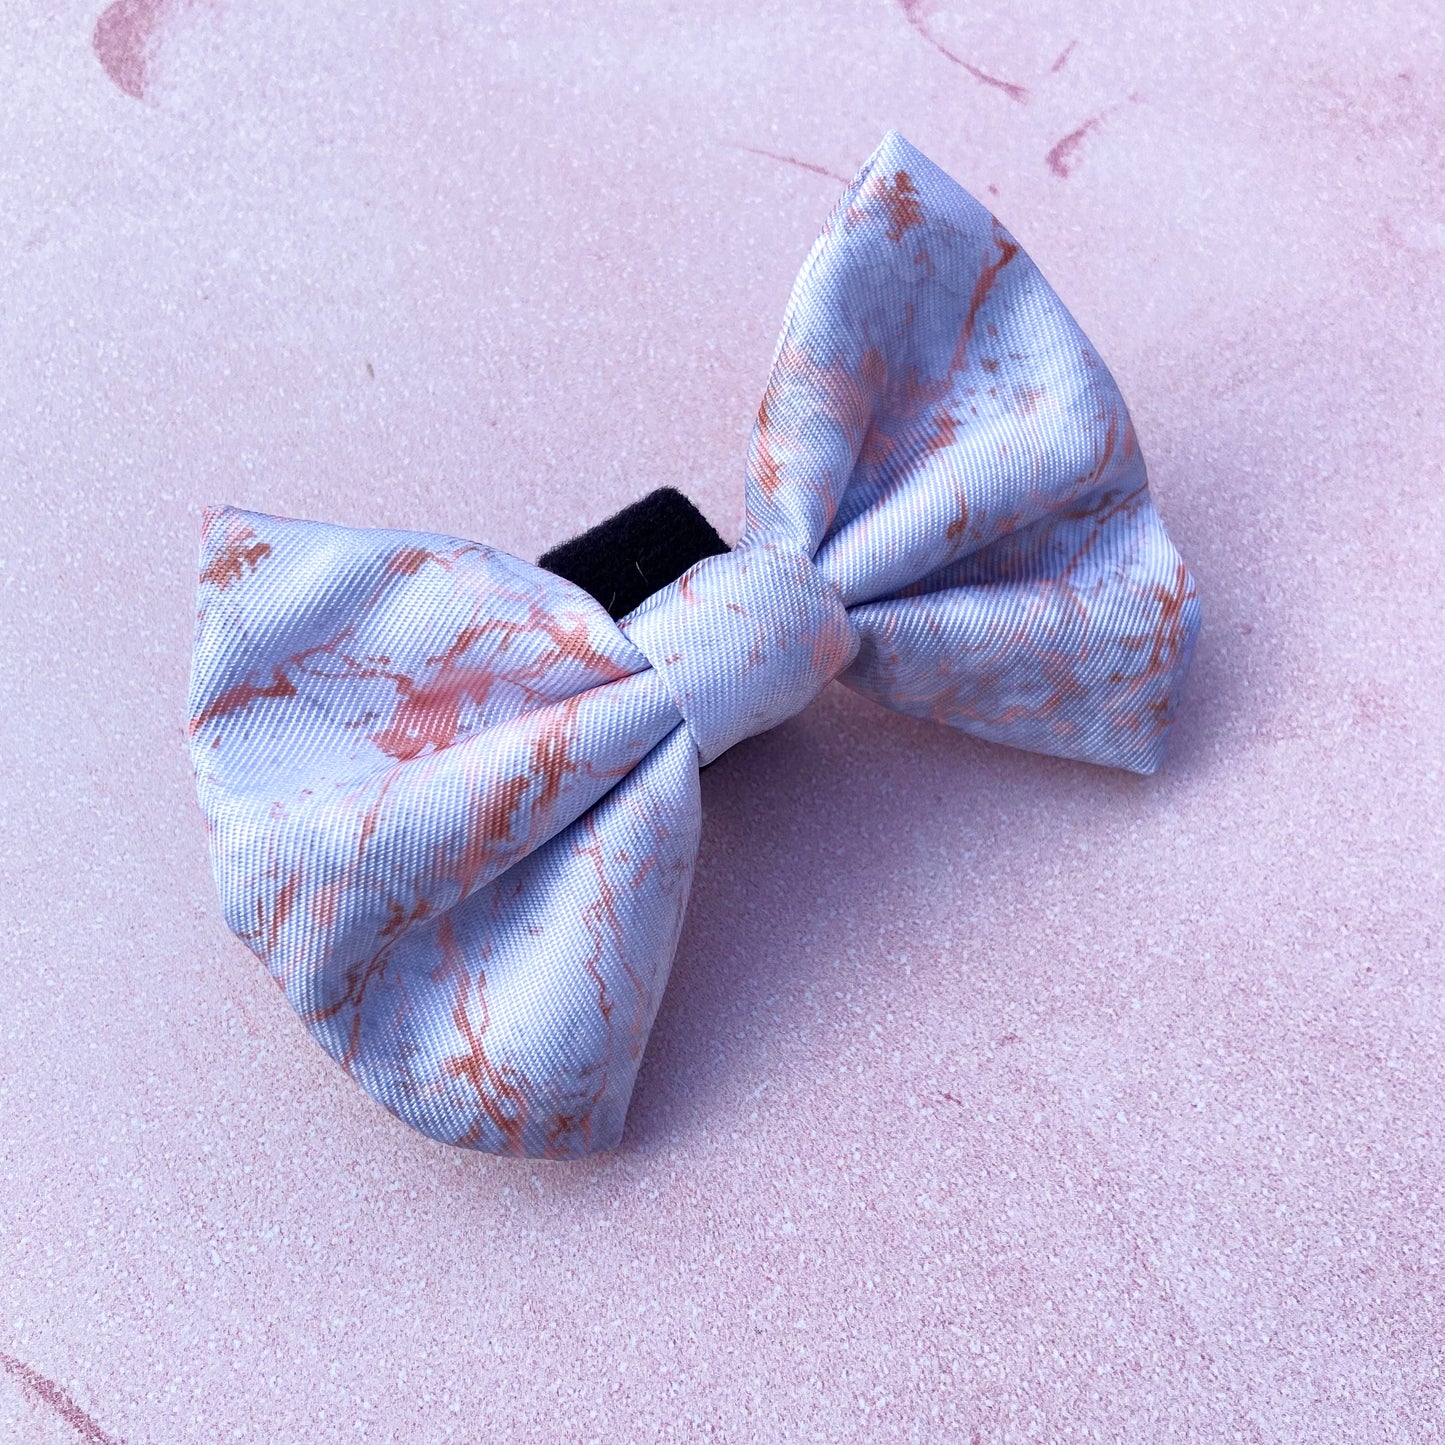 Rose Gold Marble Deluxe Bow Tie